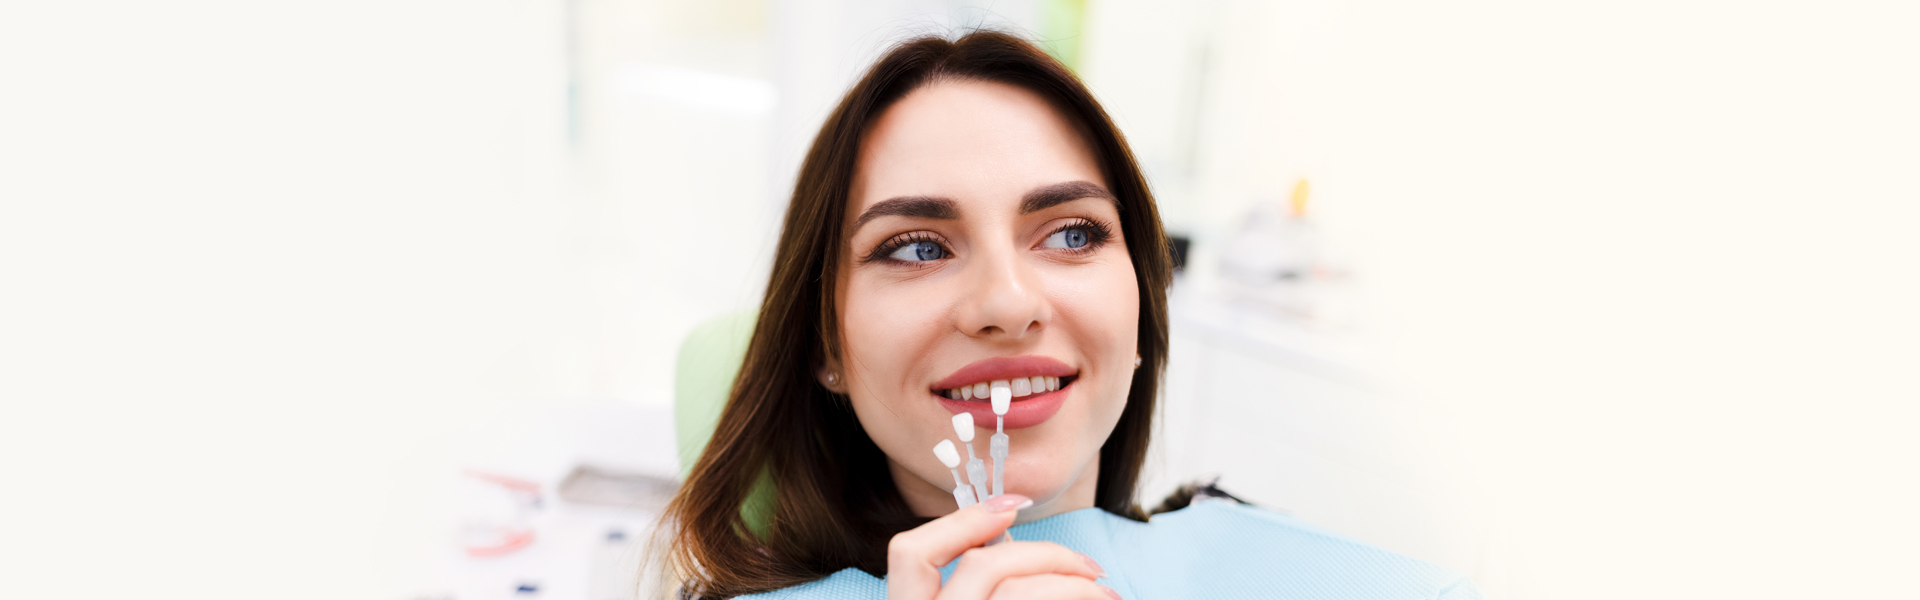 How Can Dental Veneers Improve Your Smile?